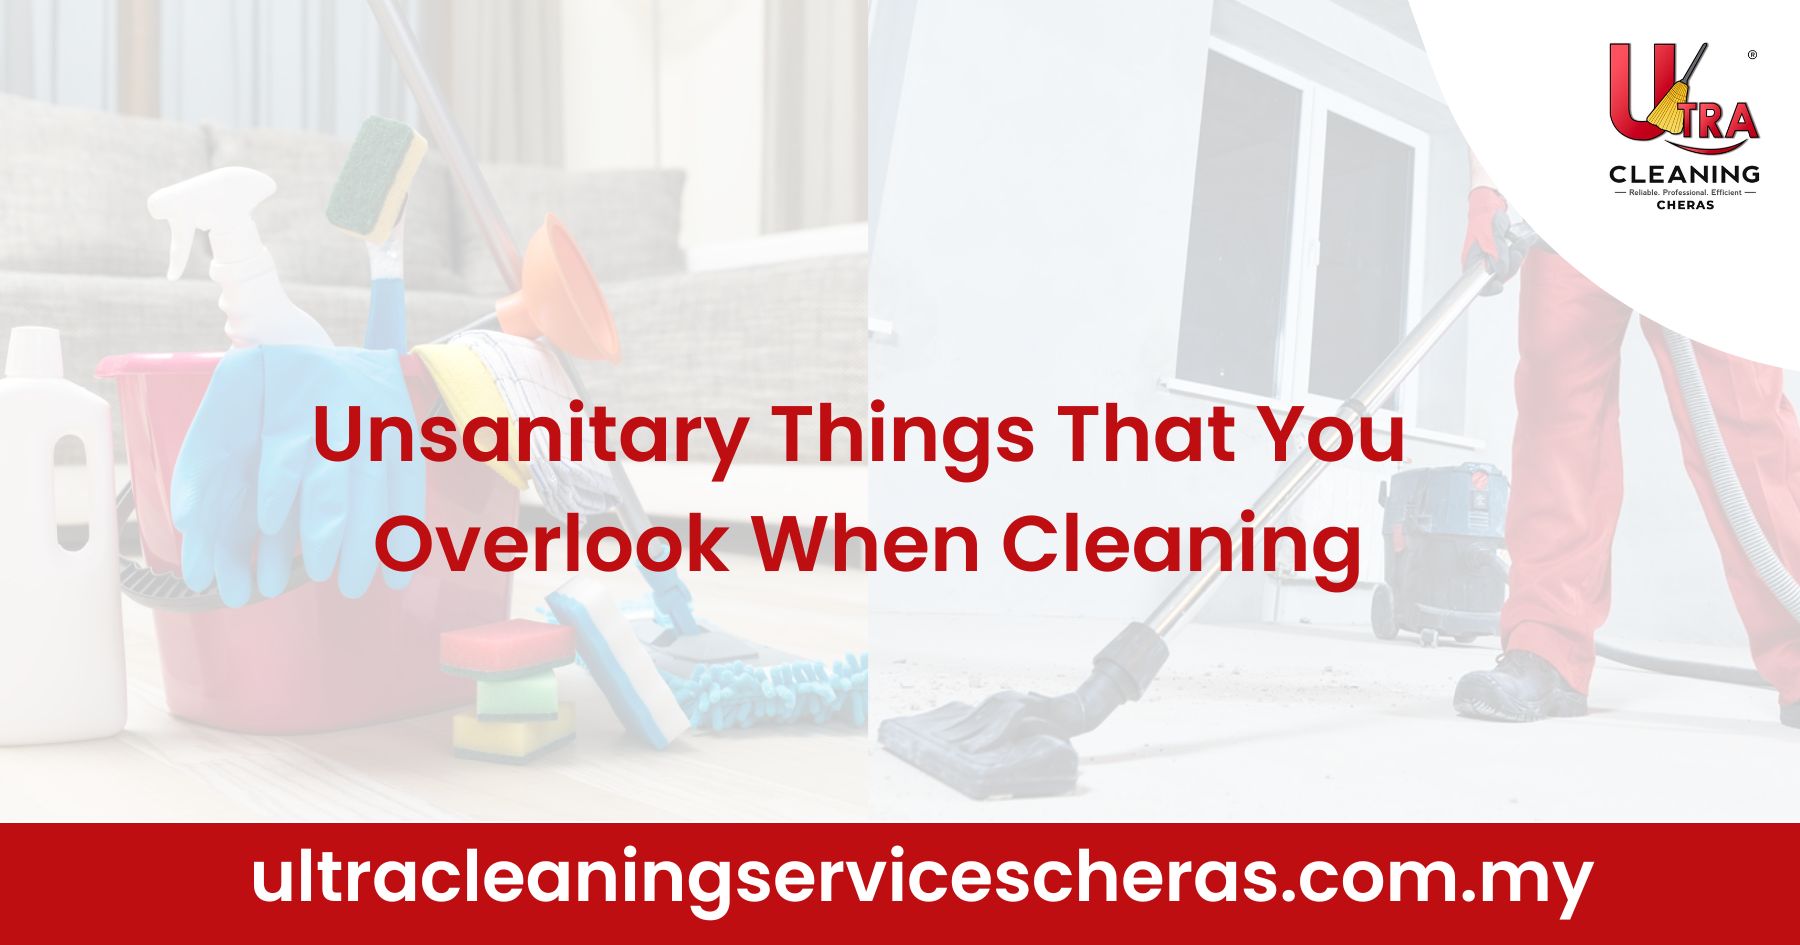 Unsanitary Things That You Overlook When Cleaning